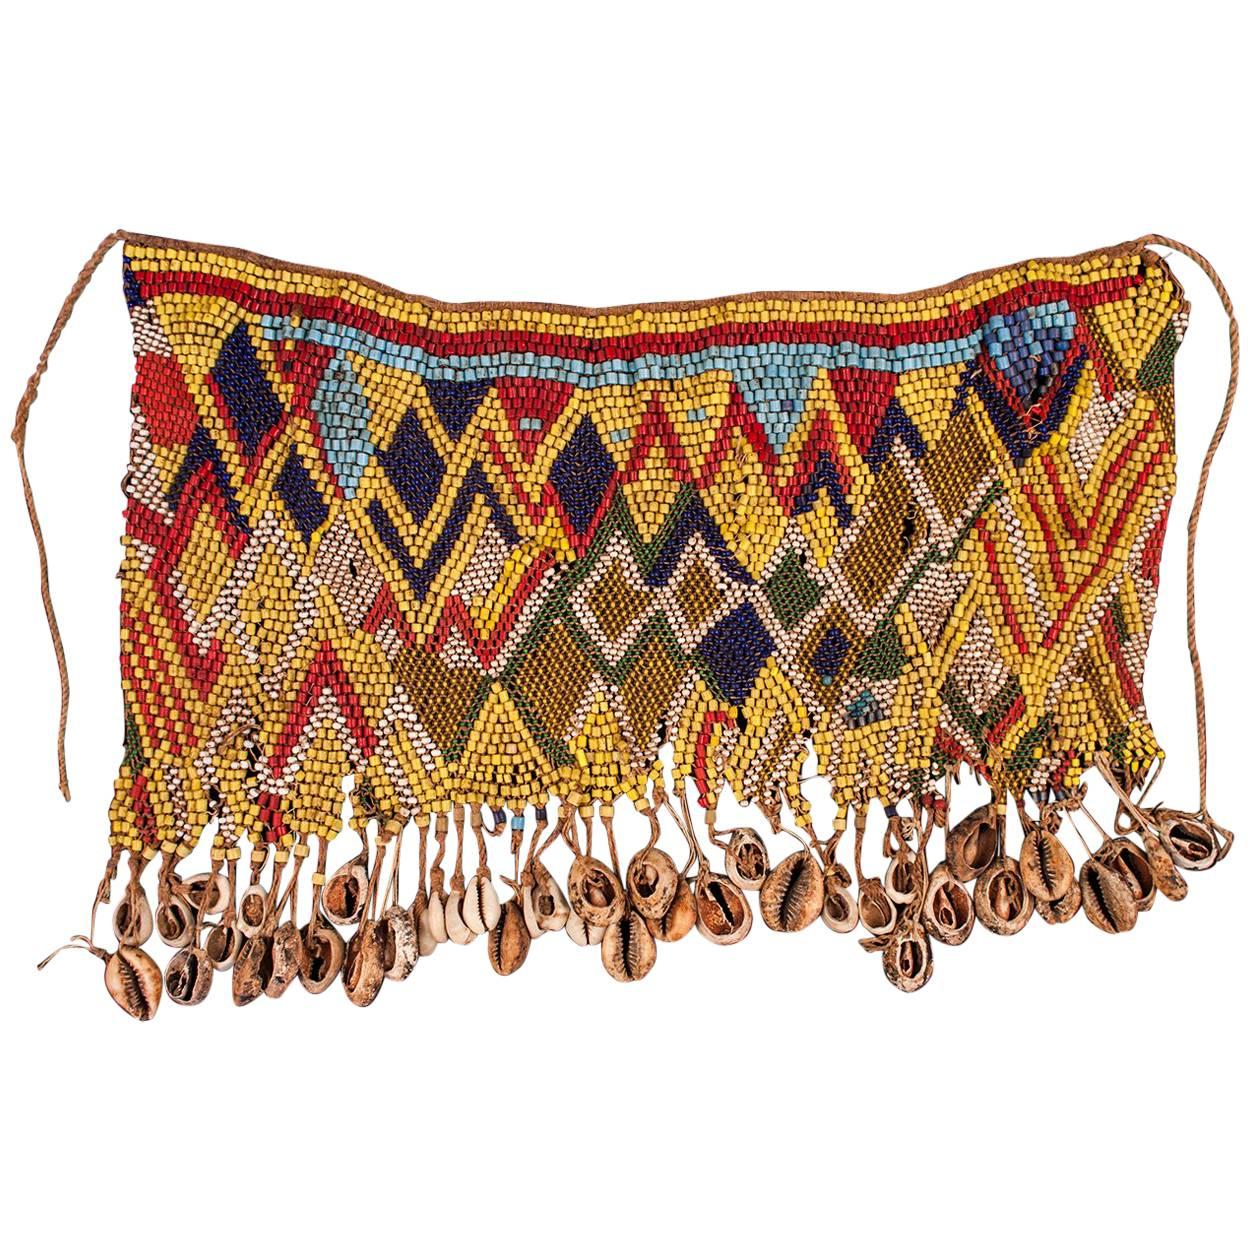 Mid-20th Century Tribal Beaded Cache-Sex Modesty Apron, Cameroon For Sale